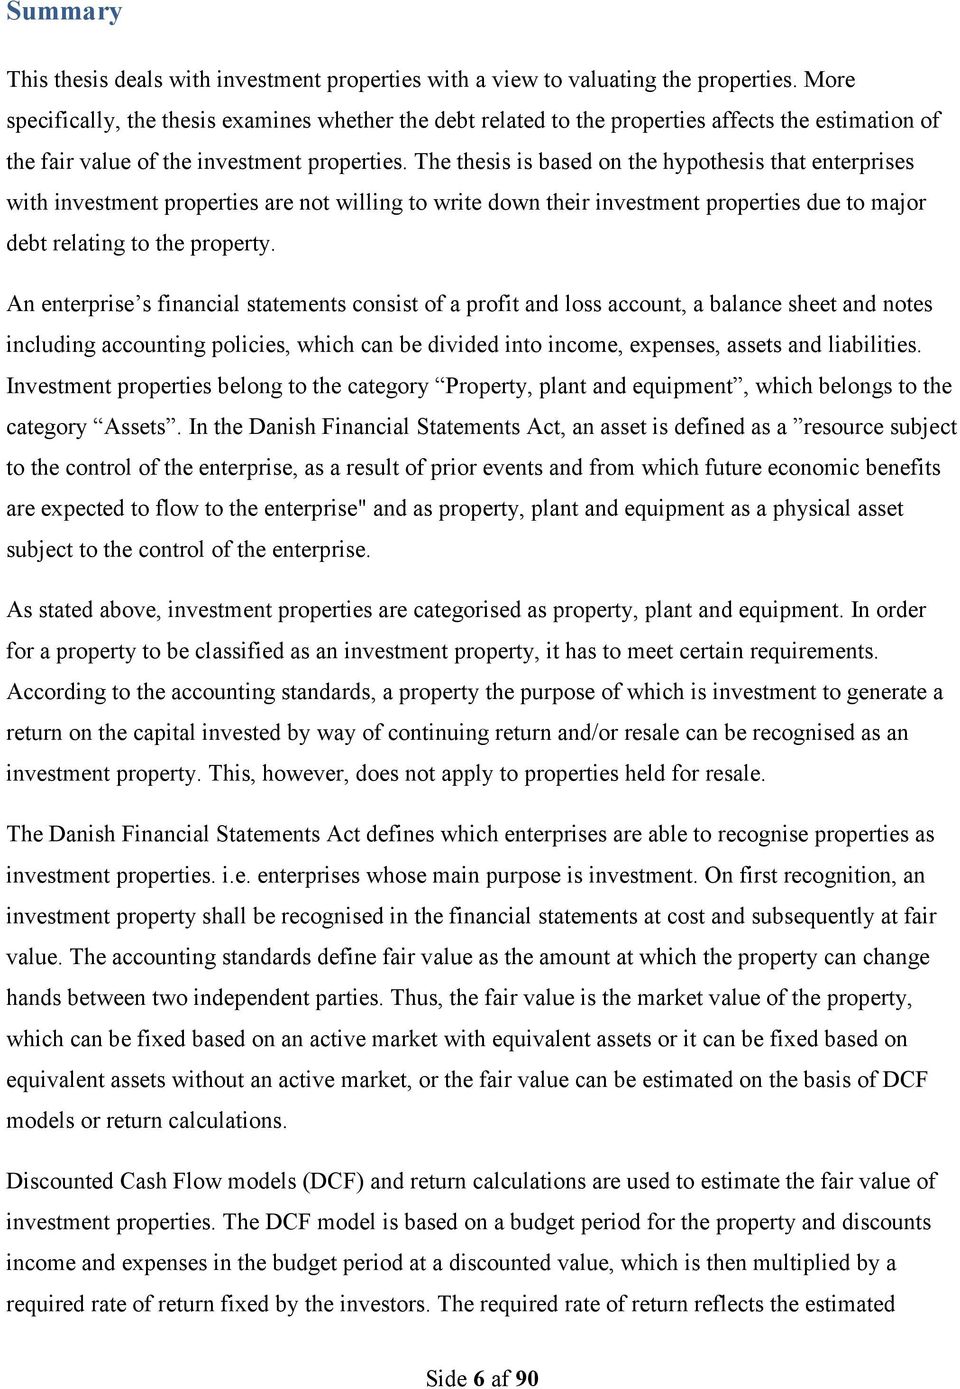 The thesis is based on the hypothesis that enterprises with investment properties are not willing to write down their investment properties due to major debt relating to the property.